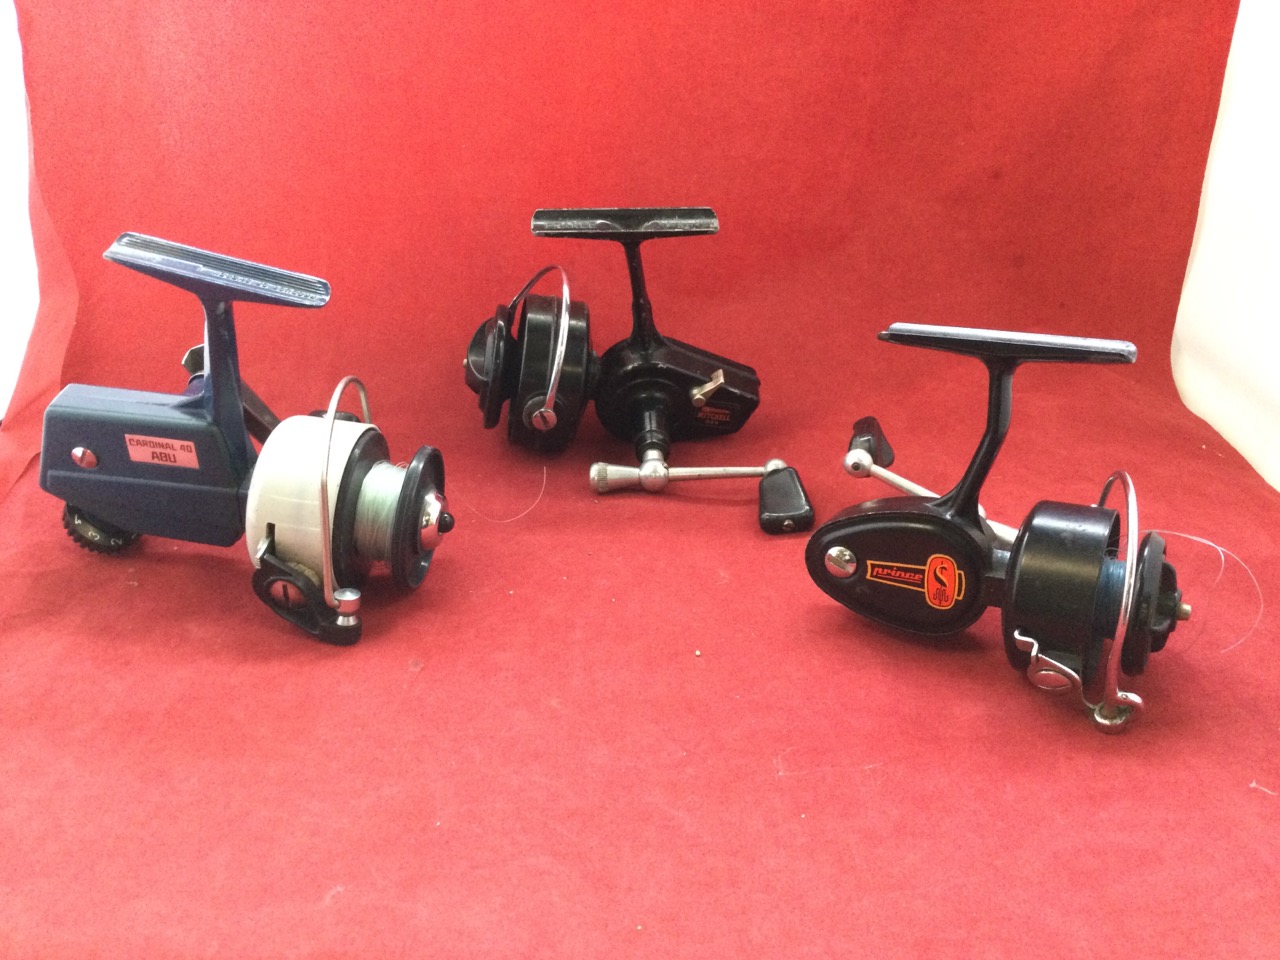 An Abu Cardinal 40 fixed spool spinning reel; a French Mitchell Garcia 324 spinning reel; and a